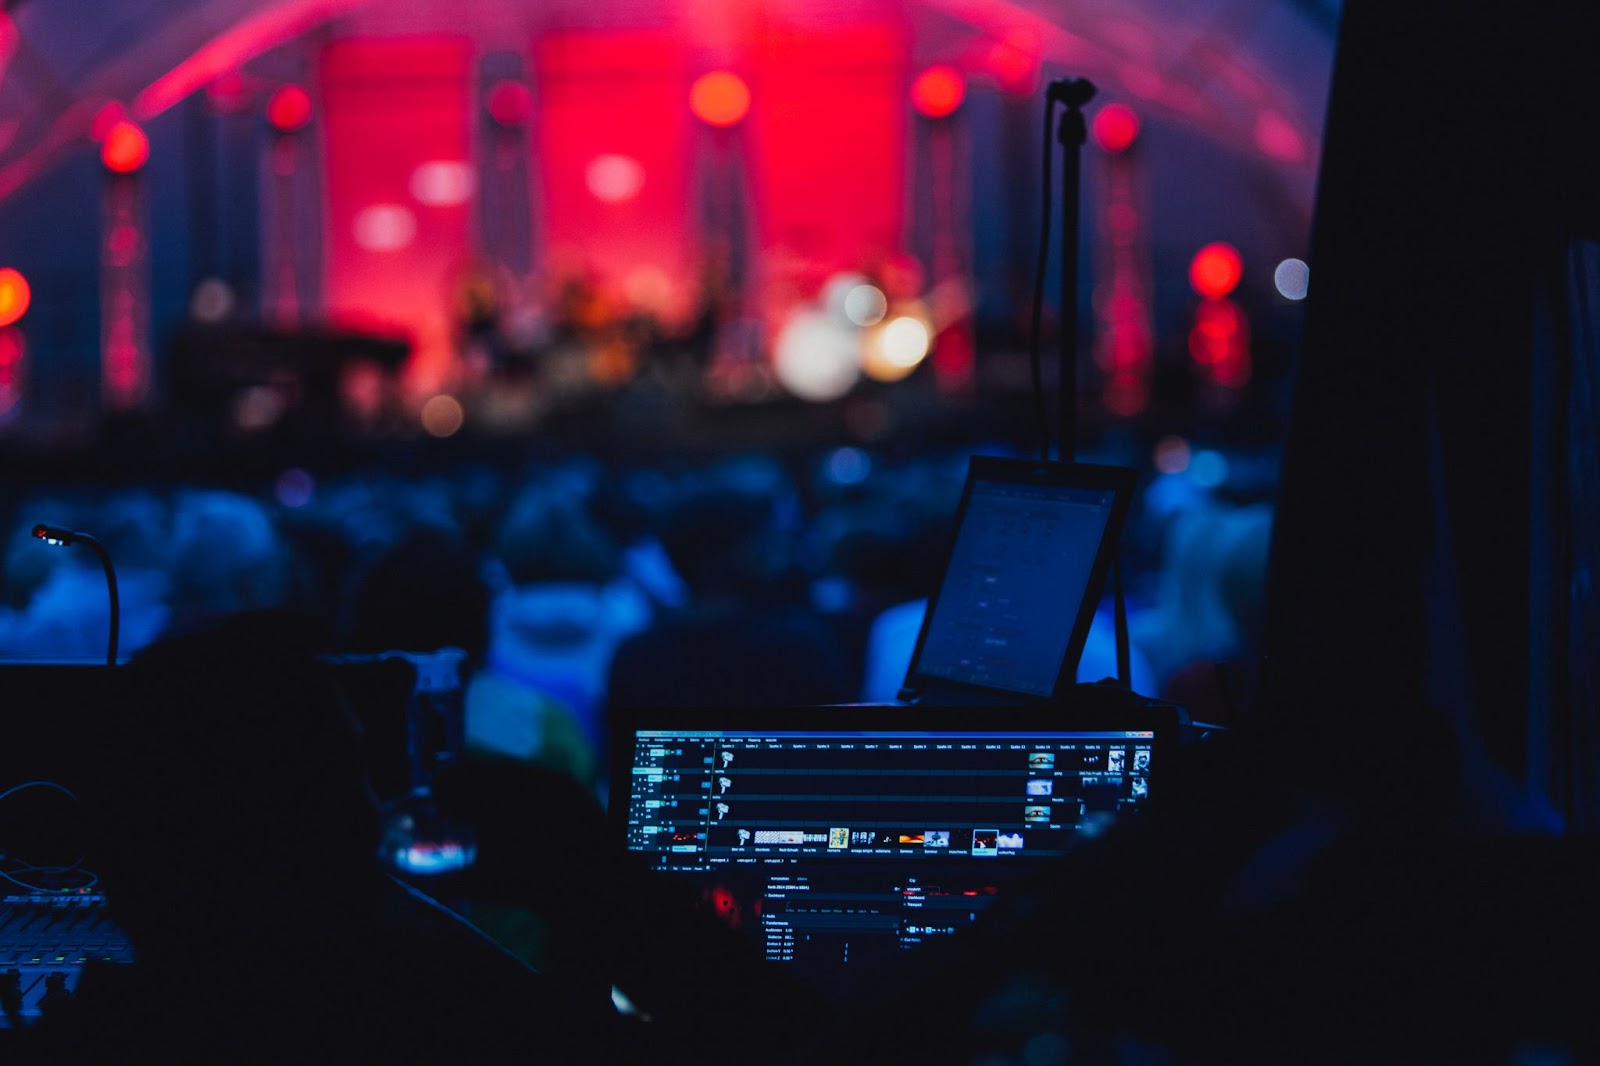 View from behind a DJ booth overlooking a concert crowd with stage lights illuminating the audience in a captivating blue hue.